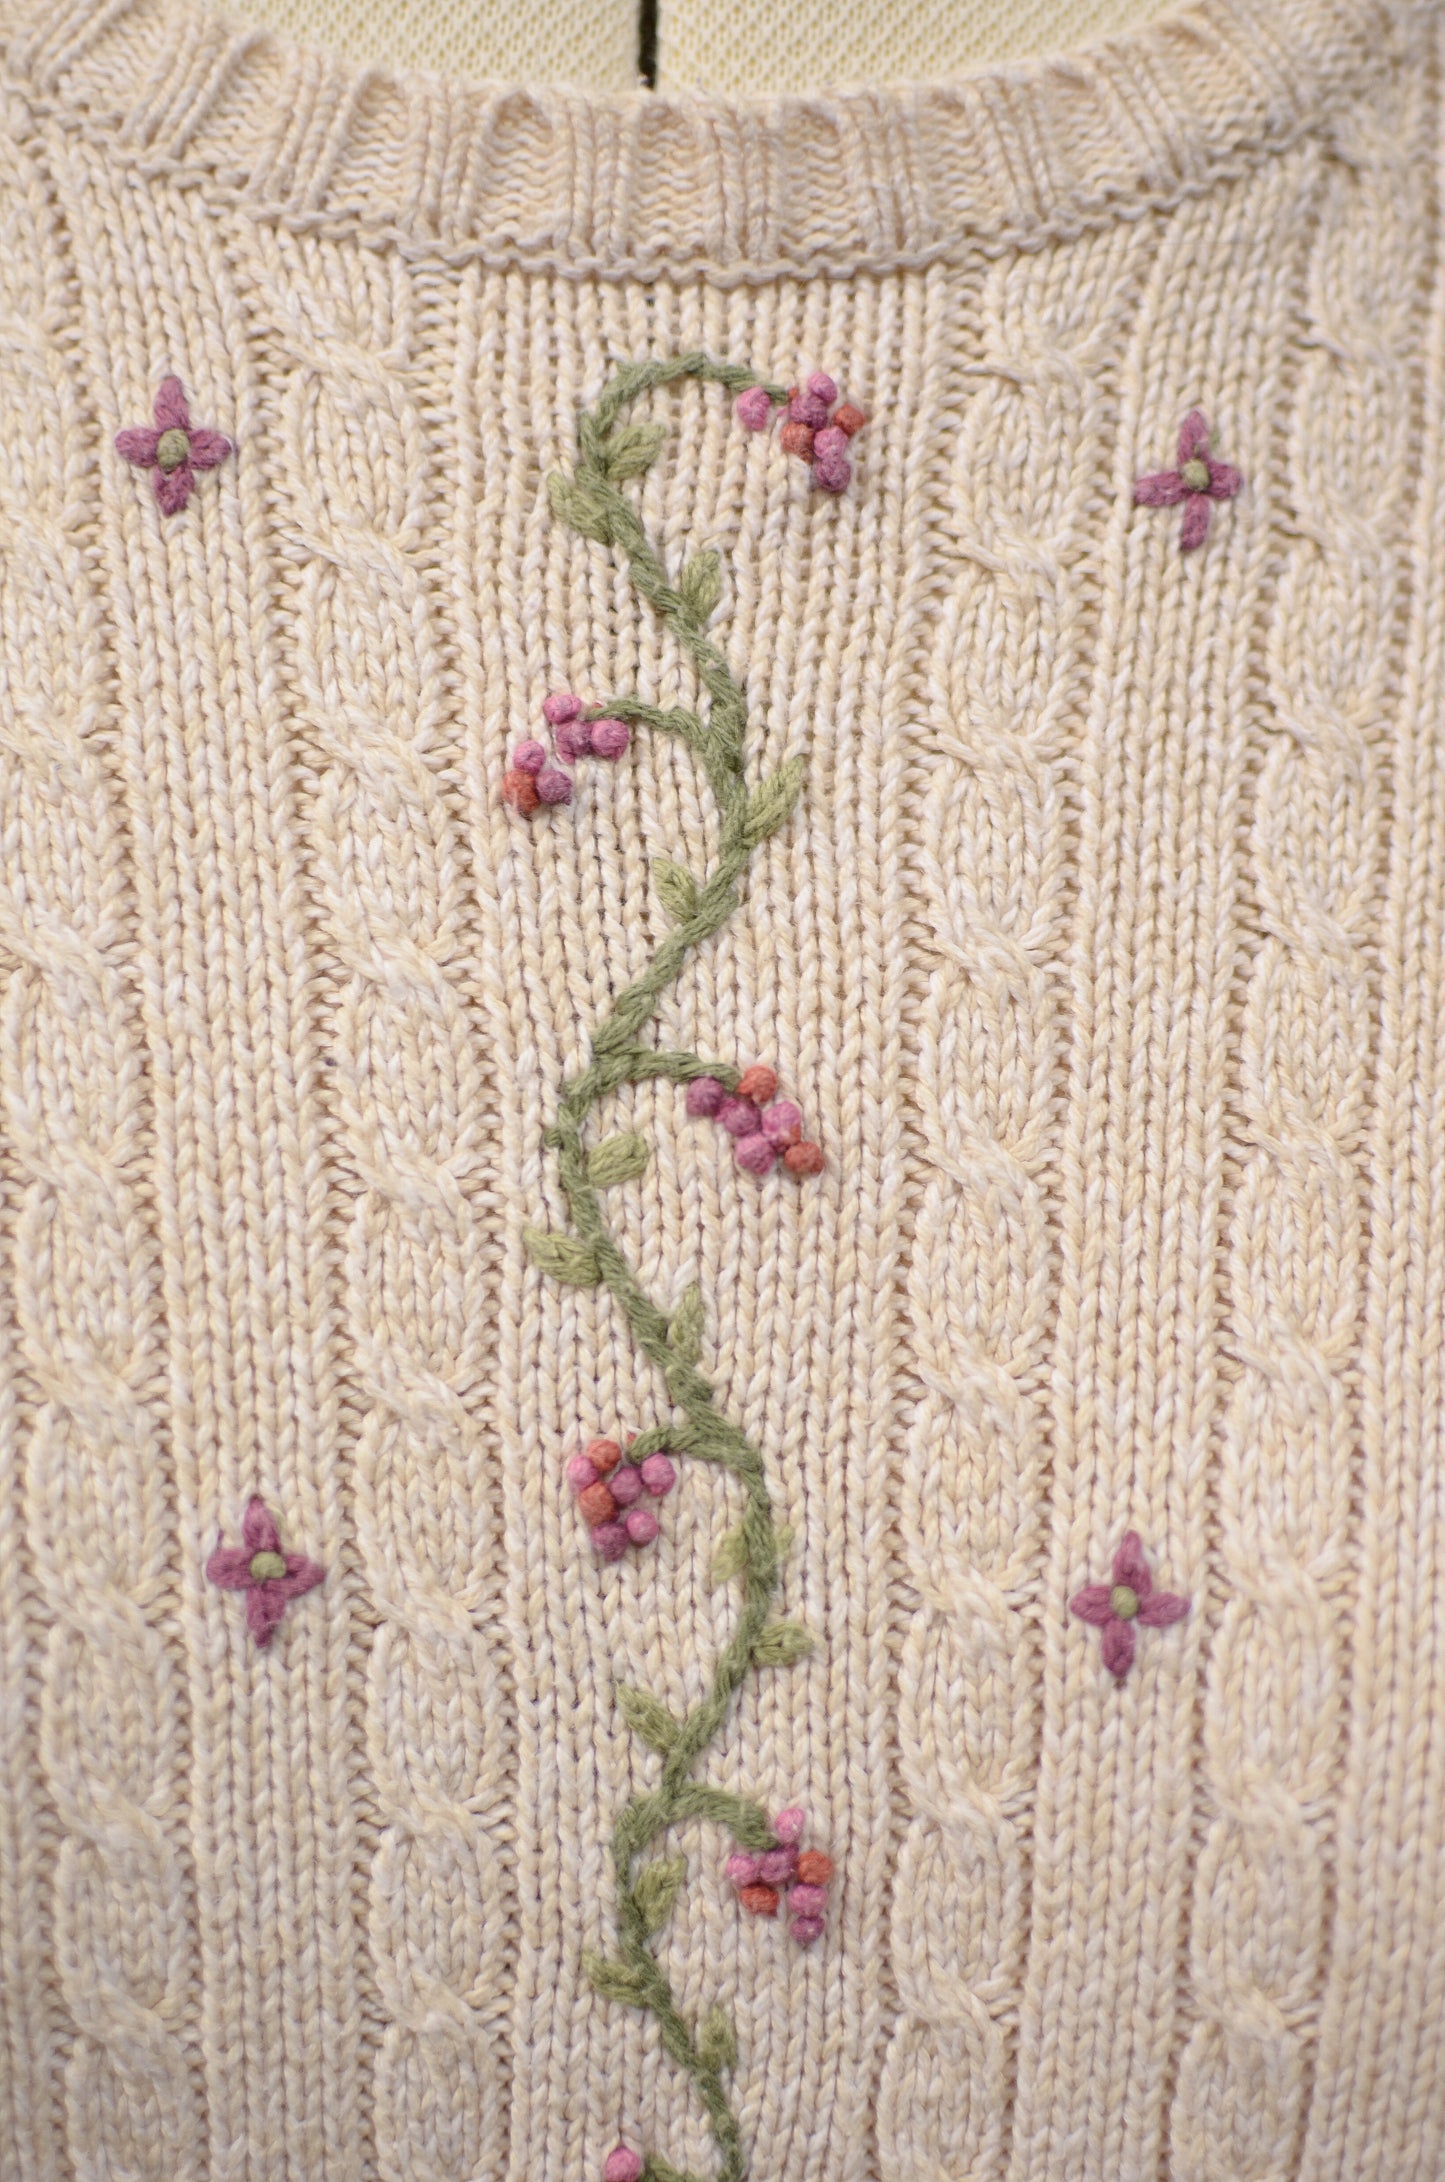 1990s Tulchan cream and pink embroidered rose jumper